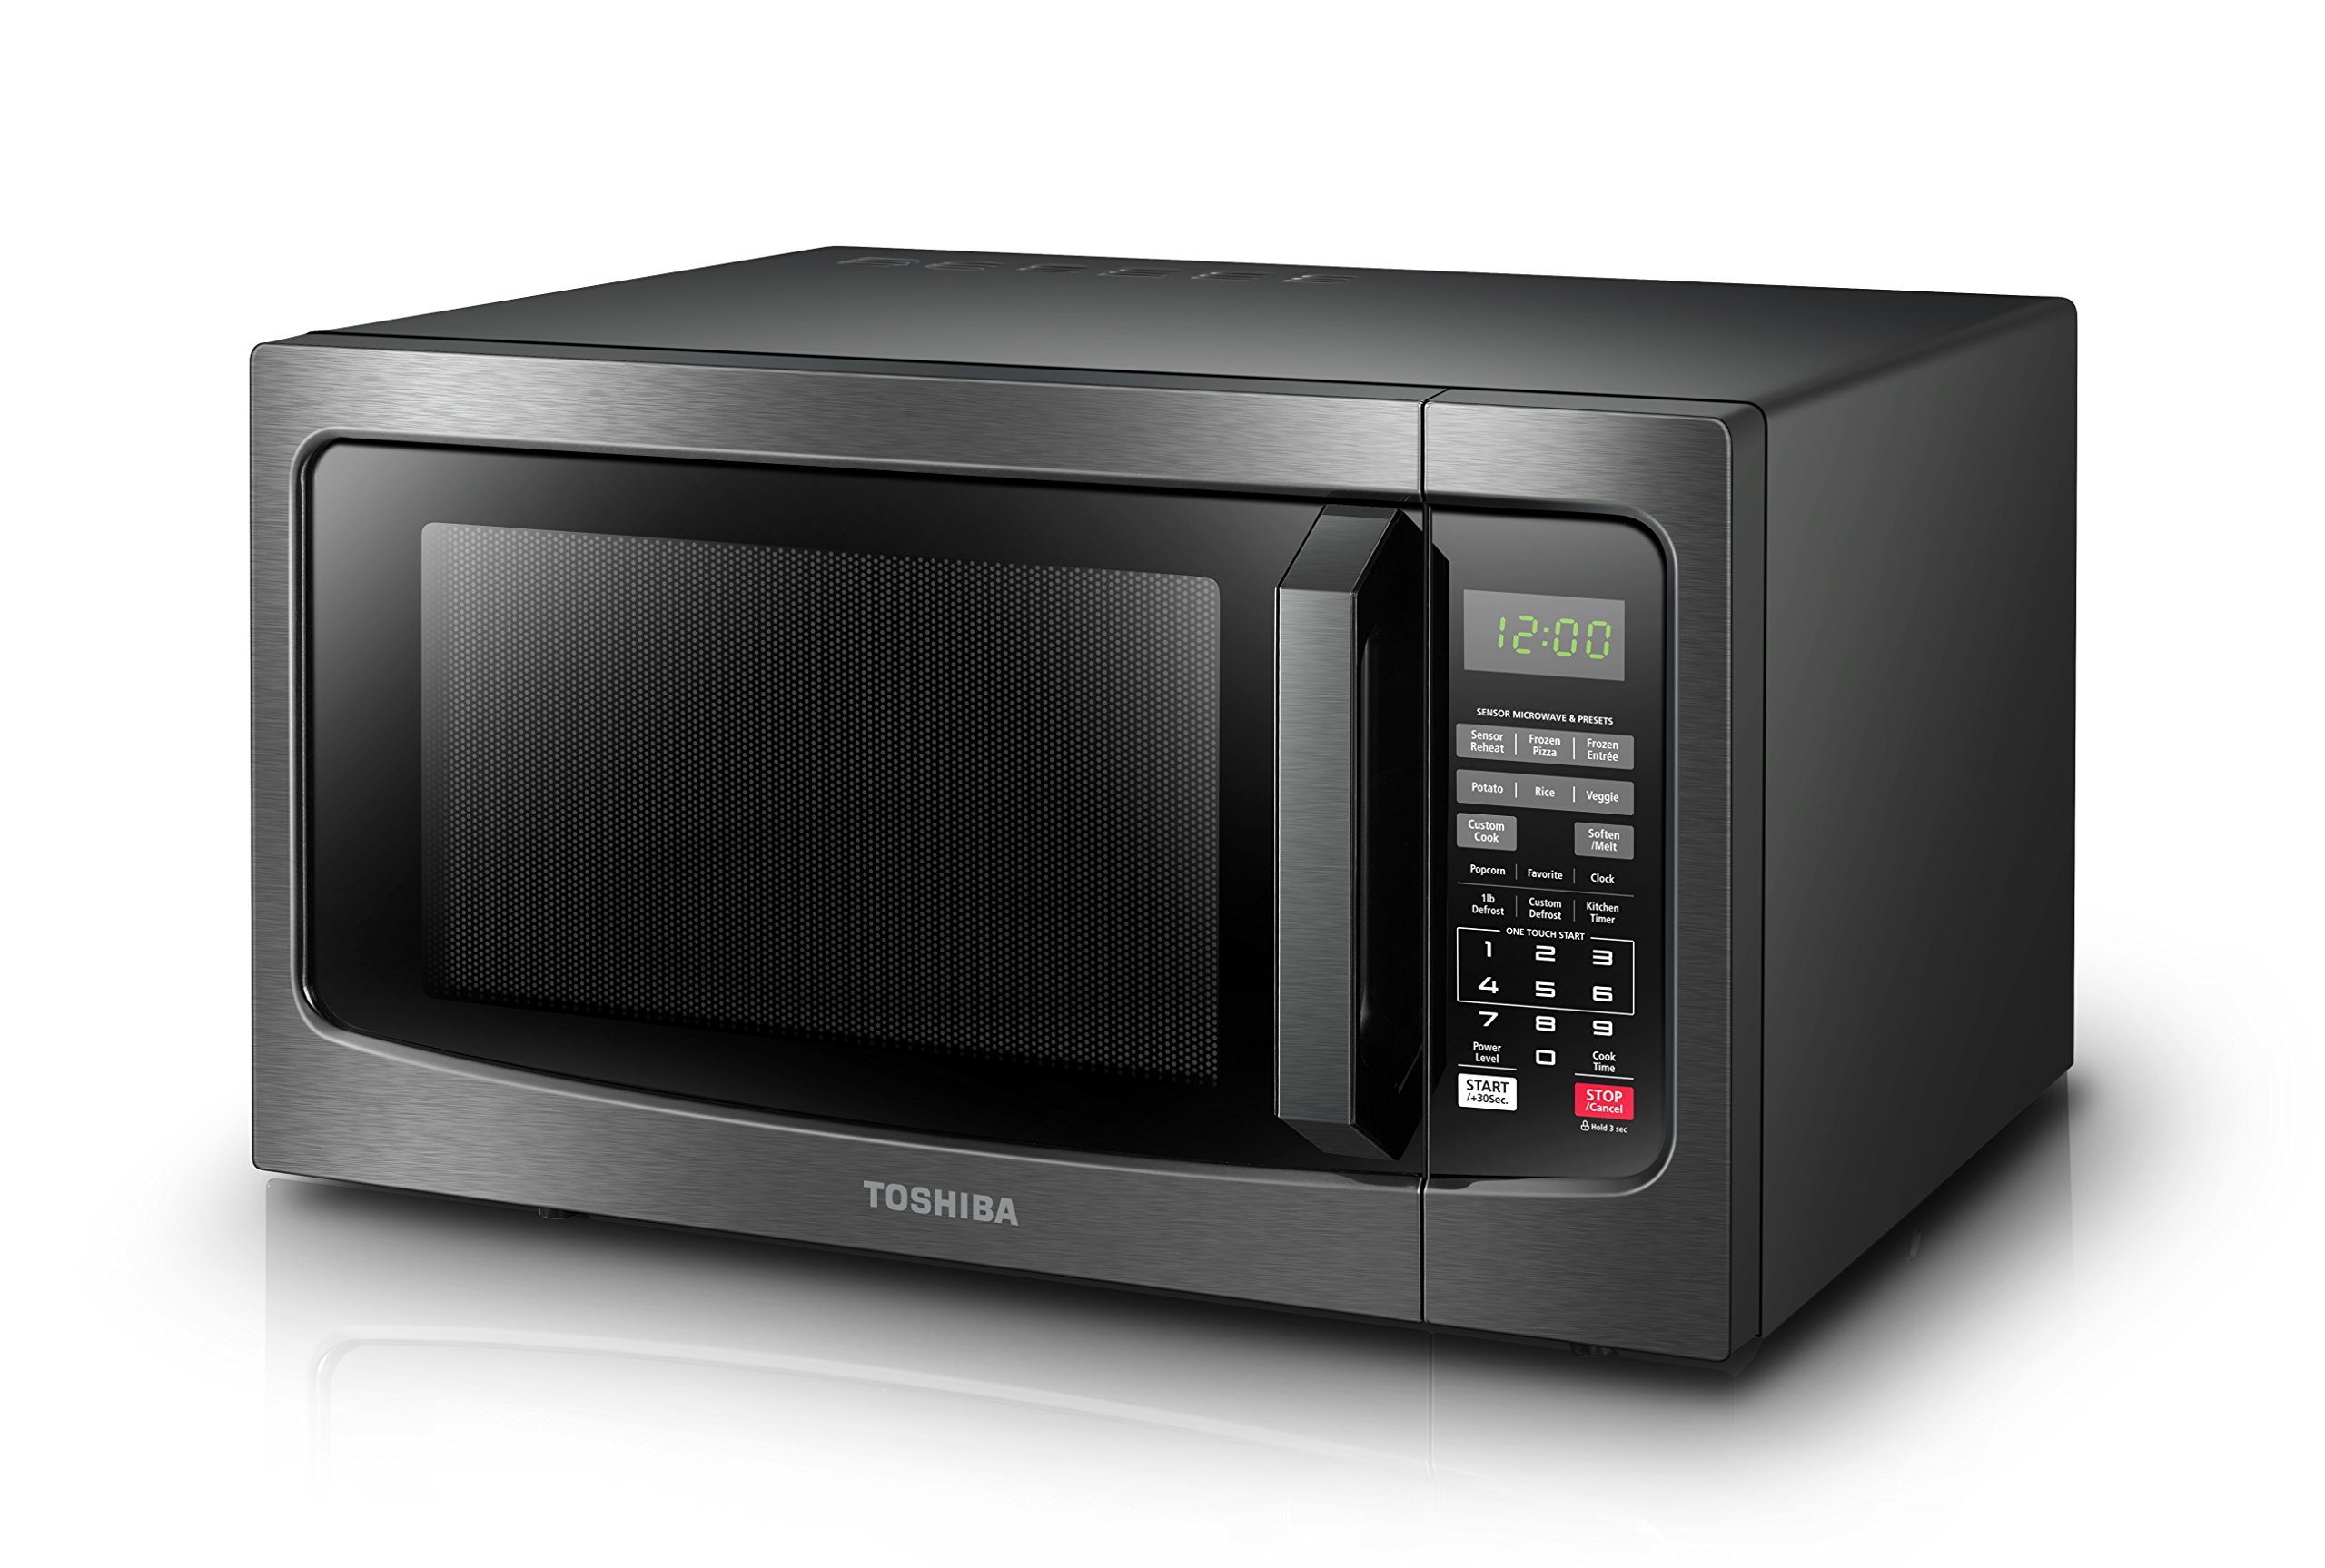 TOSHIBA EM131A5C-BS Countertop Microwave Ovens 1.2 Cu Ft, 12.4